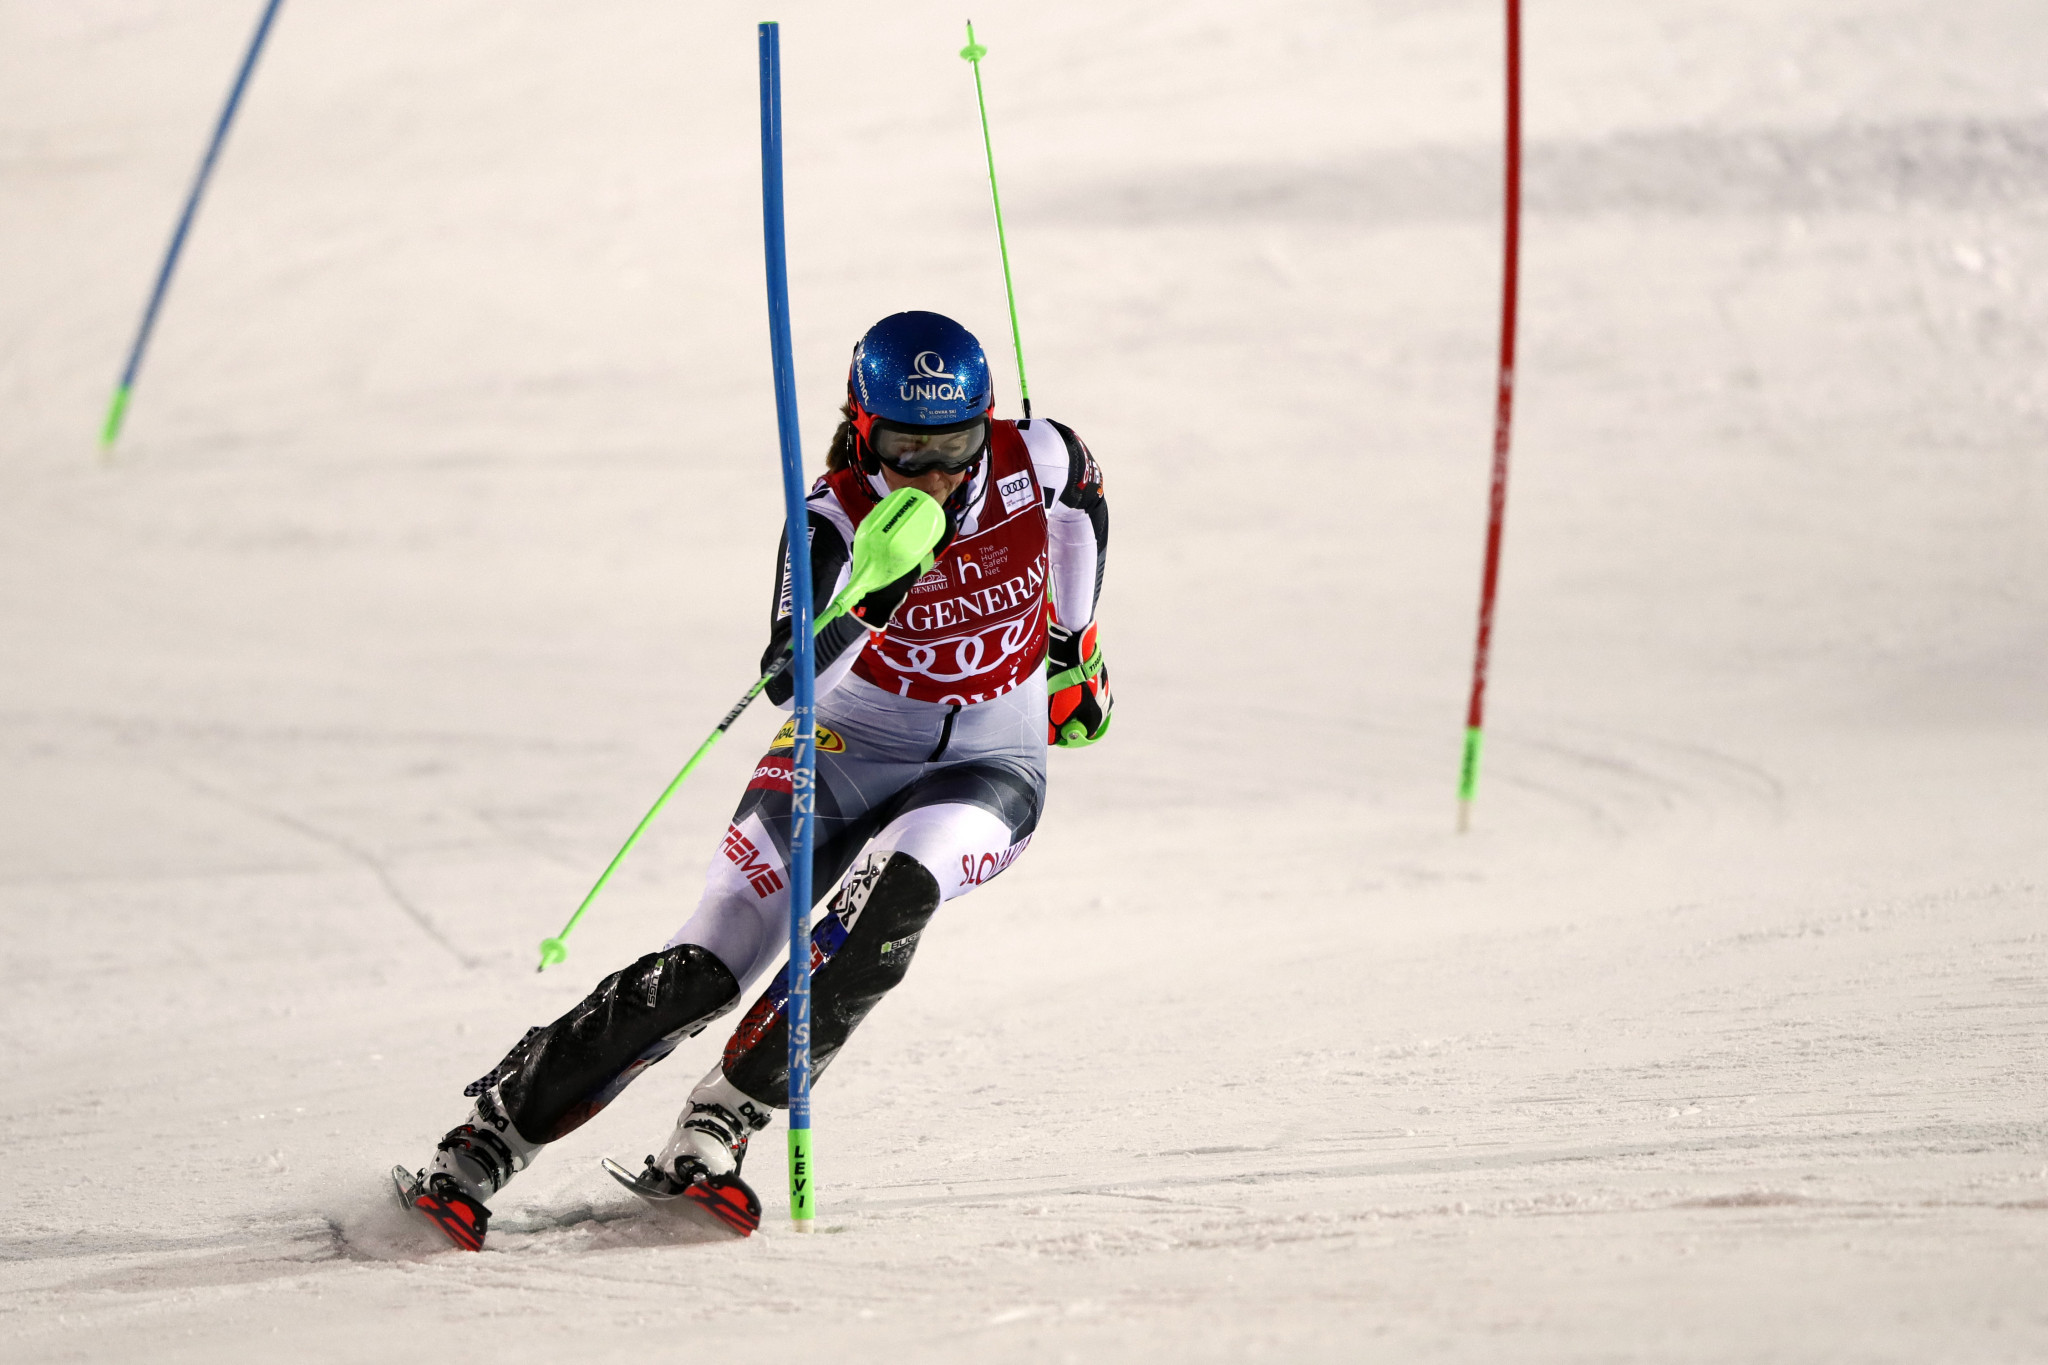 Lech-Zürs returns to FIS Alpine Ski World Cup by hosting parallel giant slalom